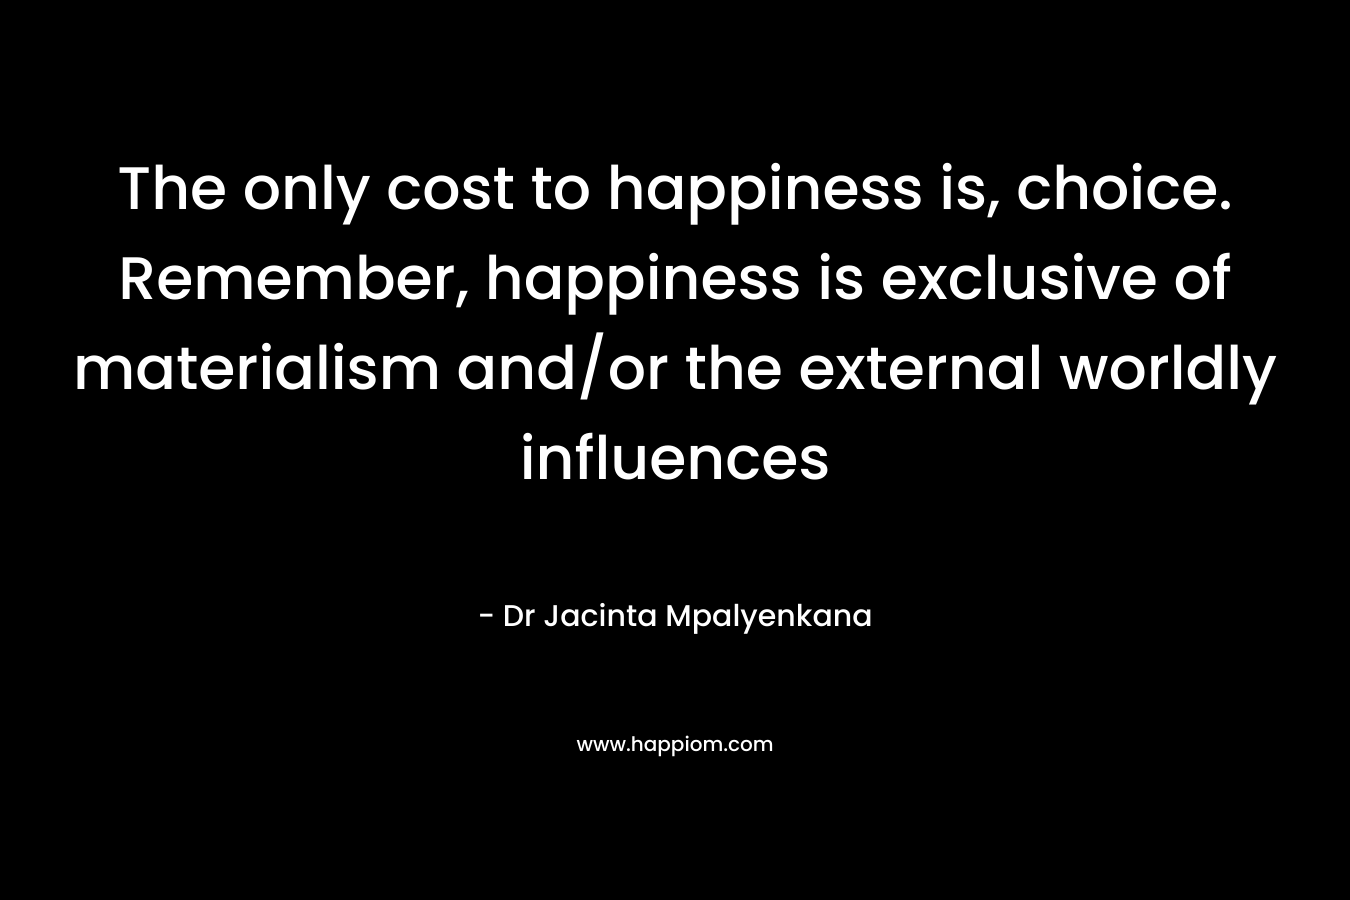 The only cost to happiness is, choice. Remember, happiness is exclusive of materialism and/or the external worldly influences